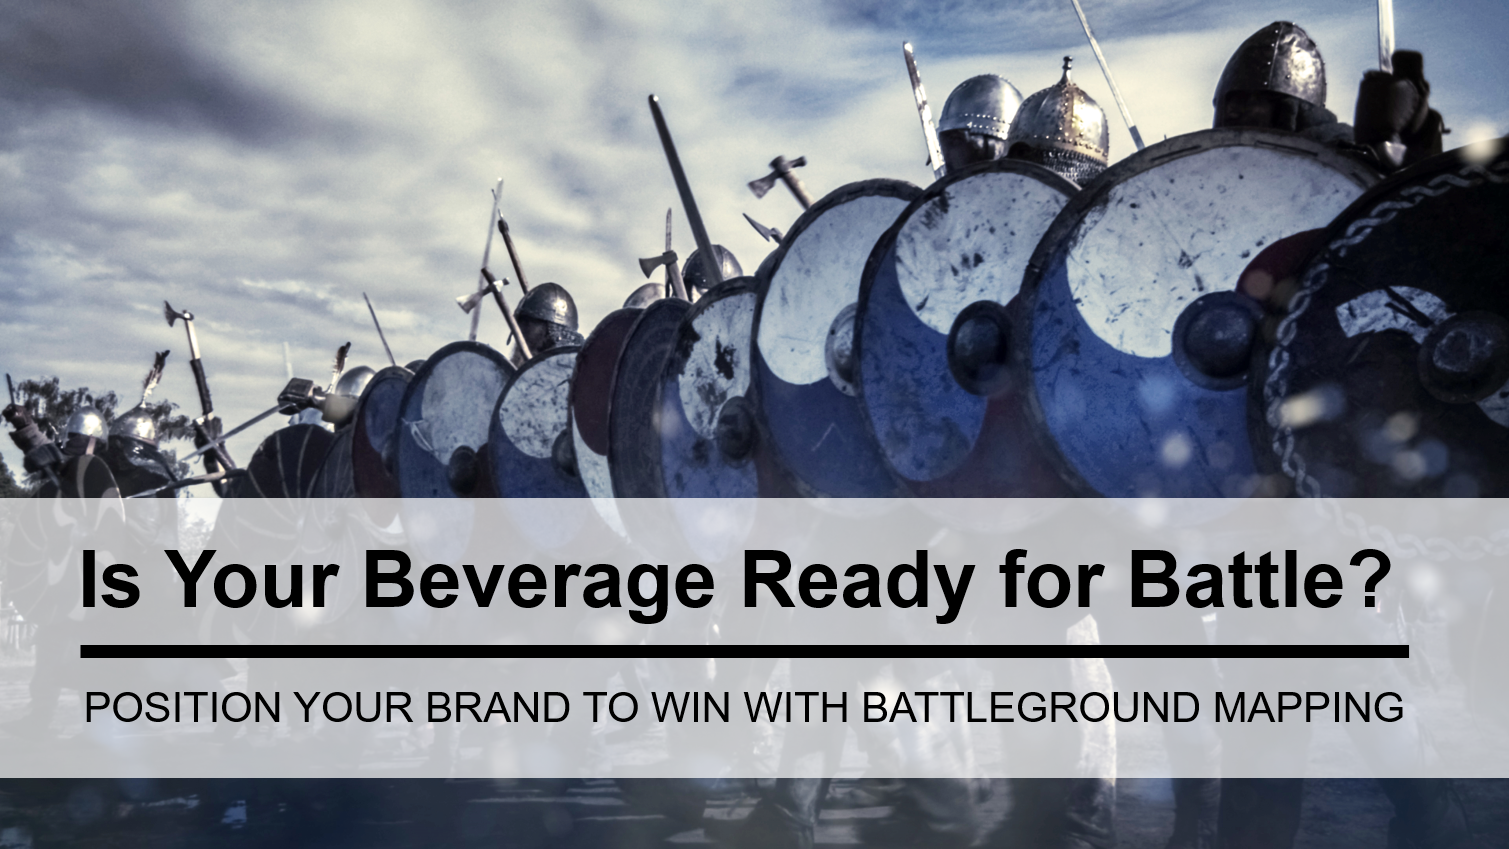 How to Position Your Brand in the Beverage Market